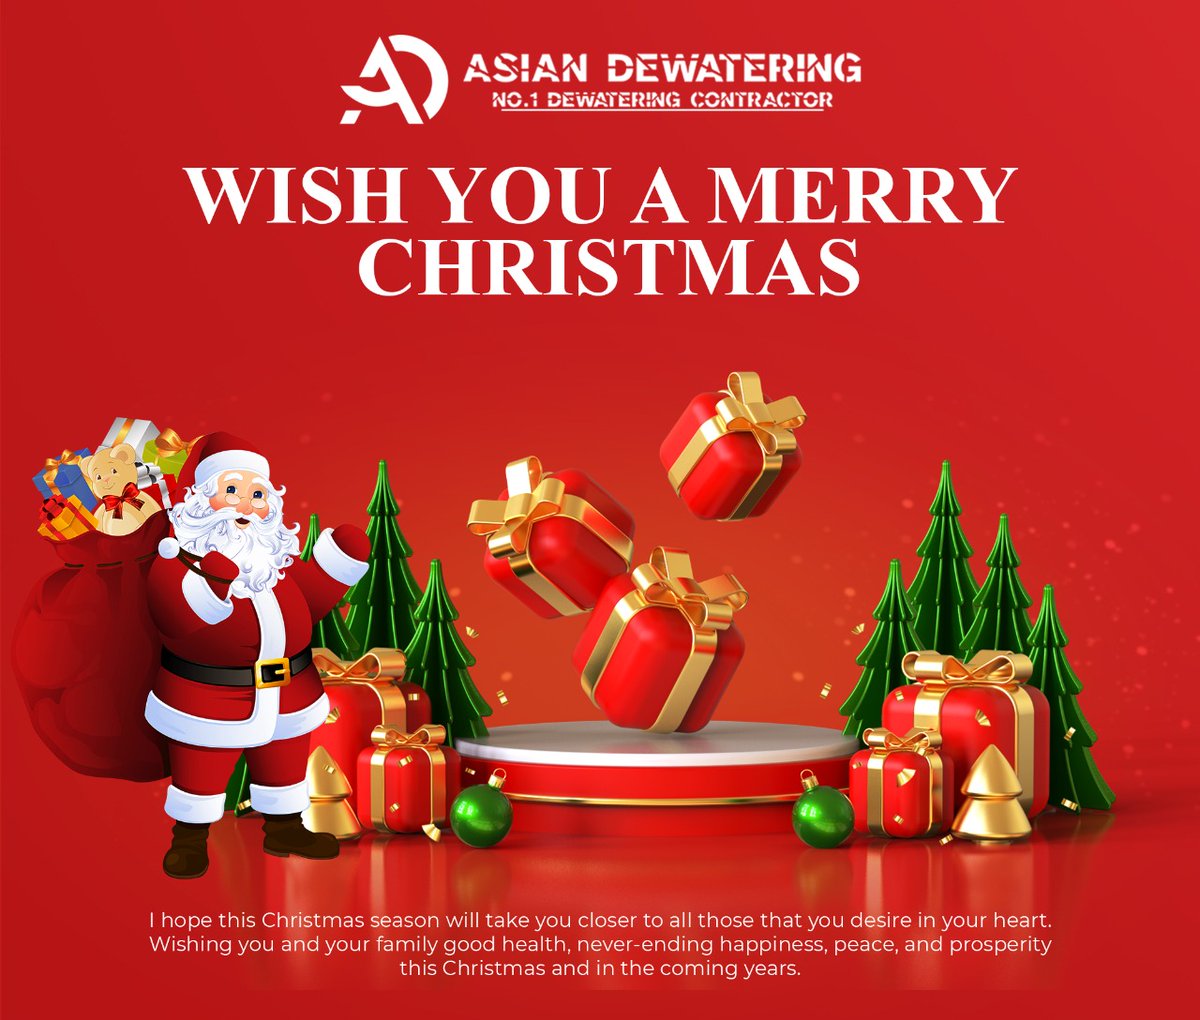 🌟 May this season be full of light and laughter for you and your family💫.. 

🔗 asiandewateringservice.com 
📲 +91 93608 06157

#merrychristmas2021 #wellpointdewatering #wellpointdewateringchennai #wellpointdewateringservice #constructiondewateringmethods #constructionsitedewater